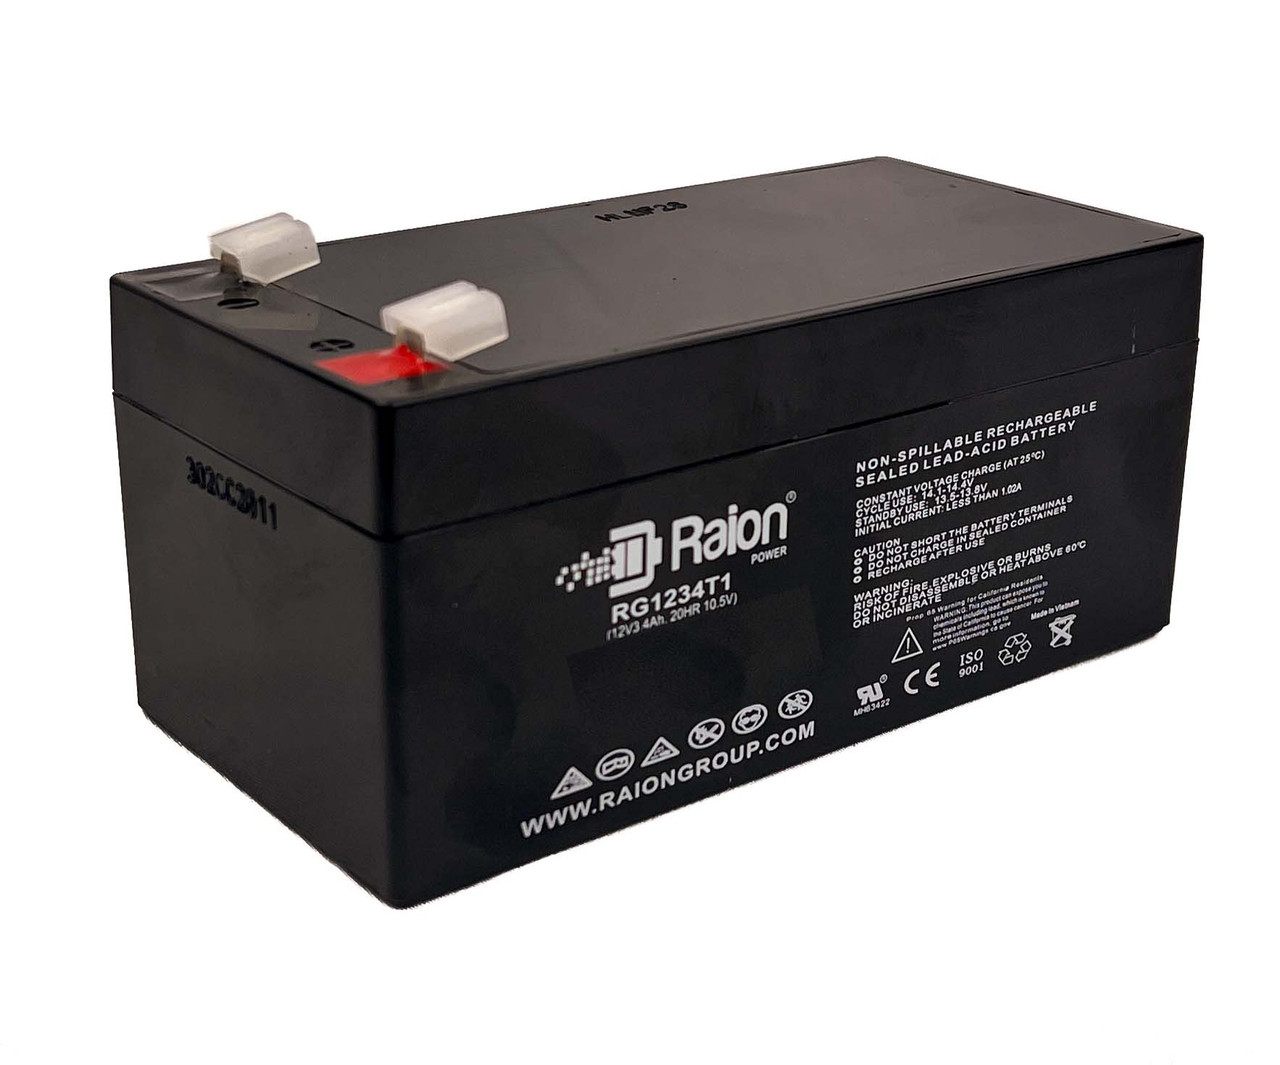 Raion Power 12V 3.4Ah Non-Spillable Replacement Battery for NERBO NB 3.4-12